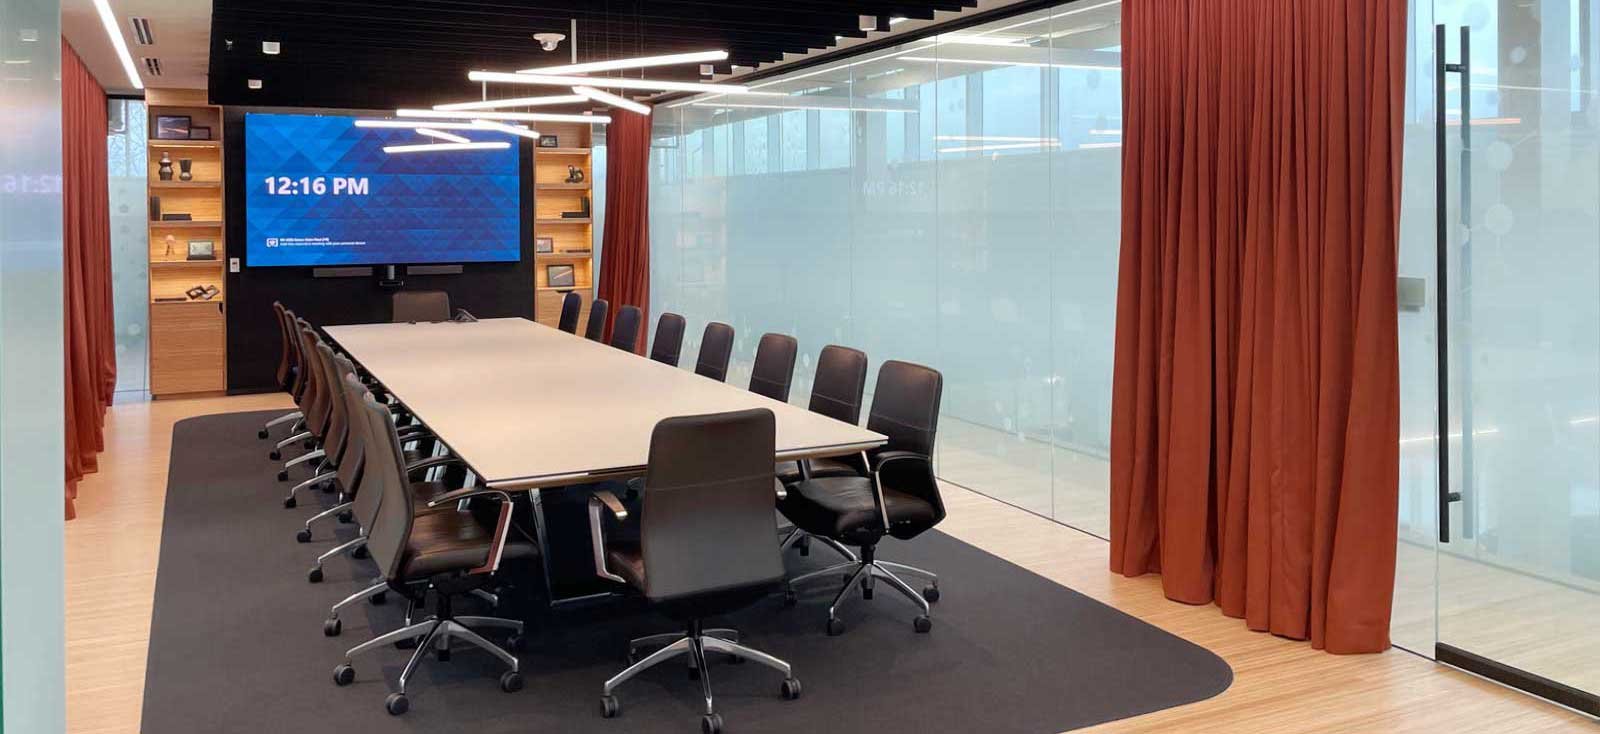 Schneider National The Grove Innovation Center corporate office interior glass wall board room completed construction by CD Smith